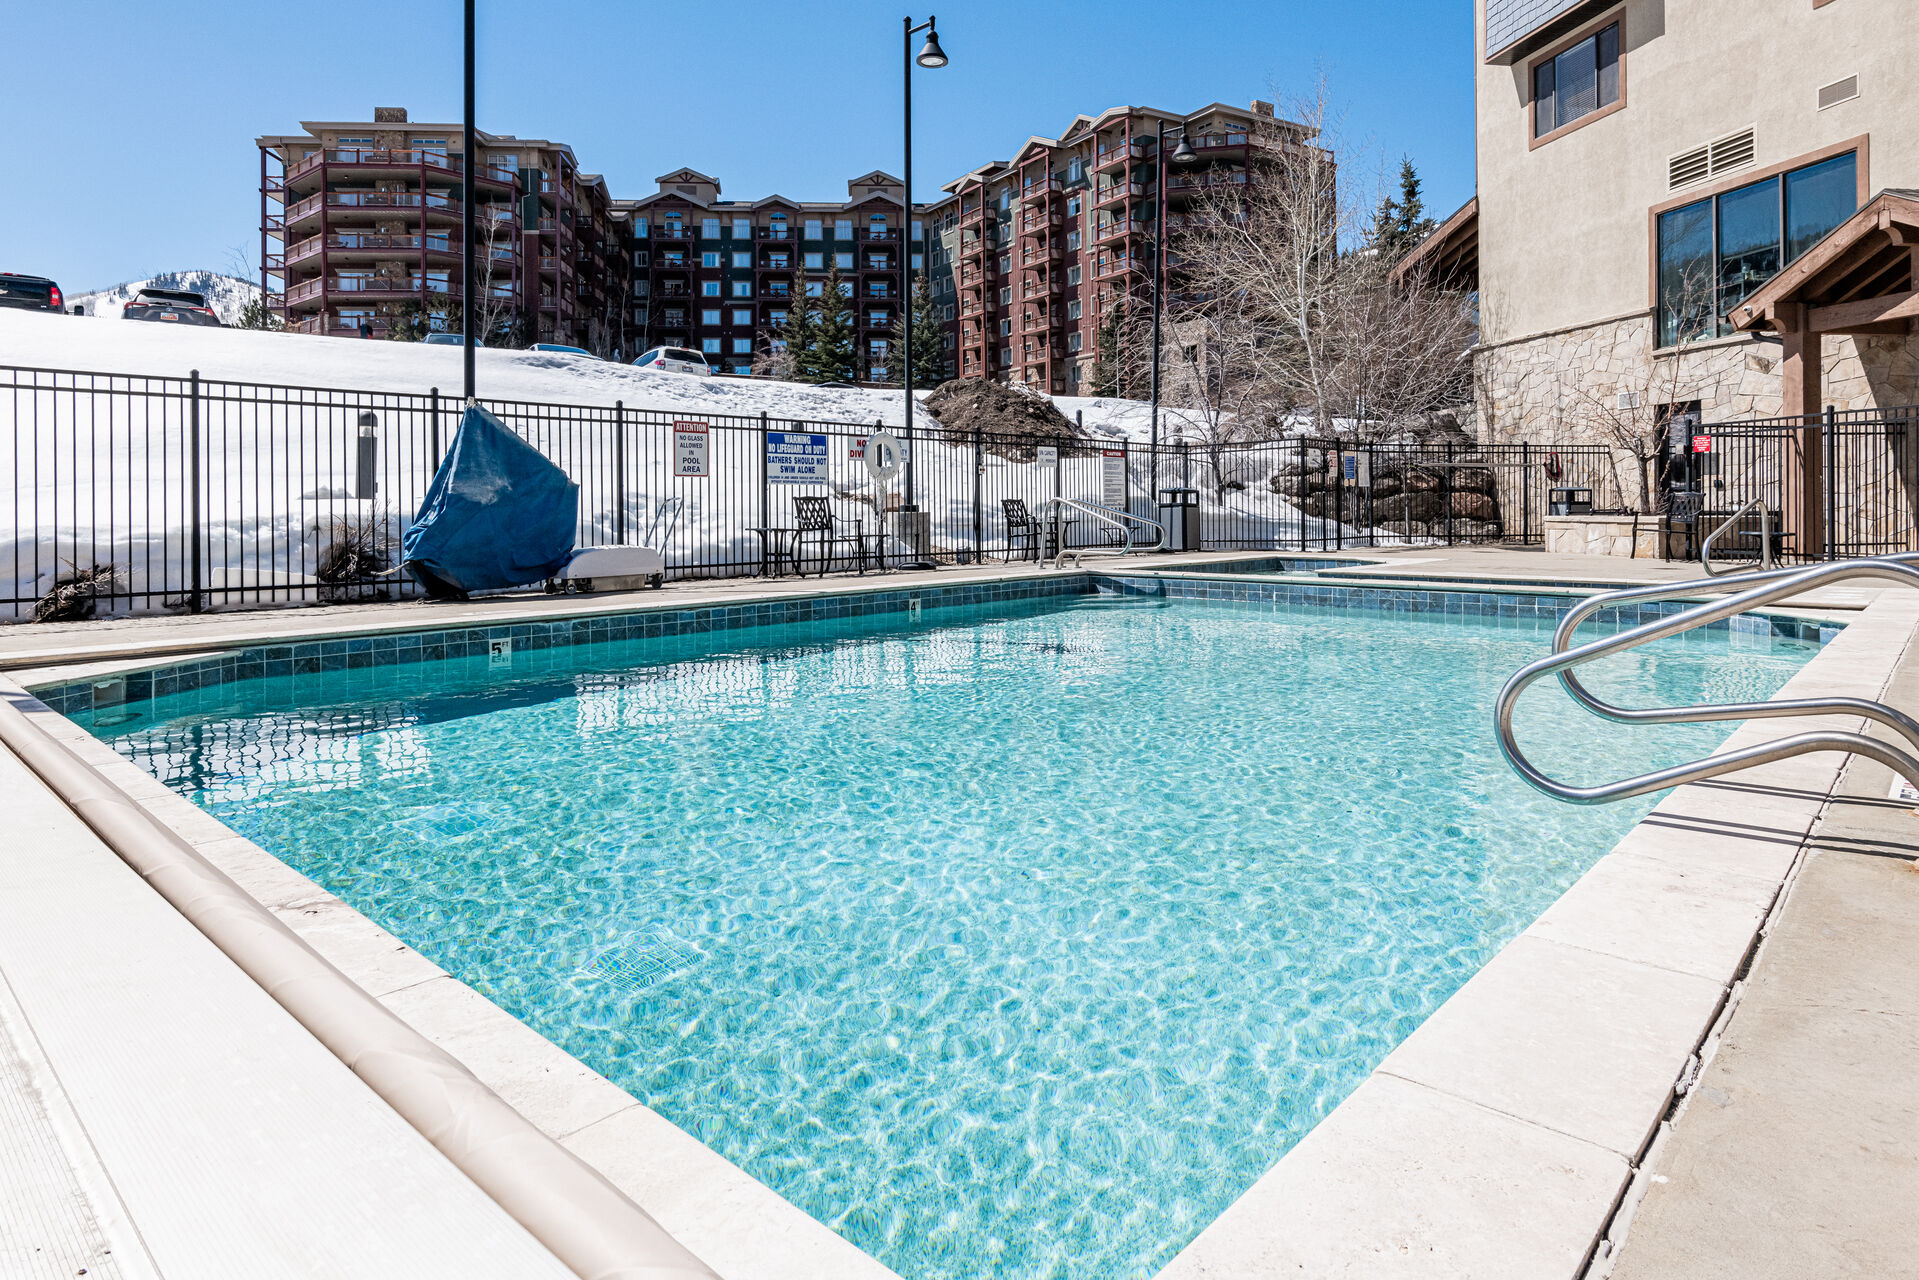 Heated community pool open year round